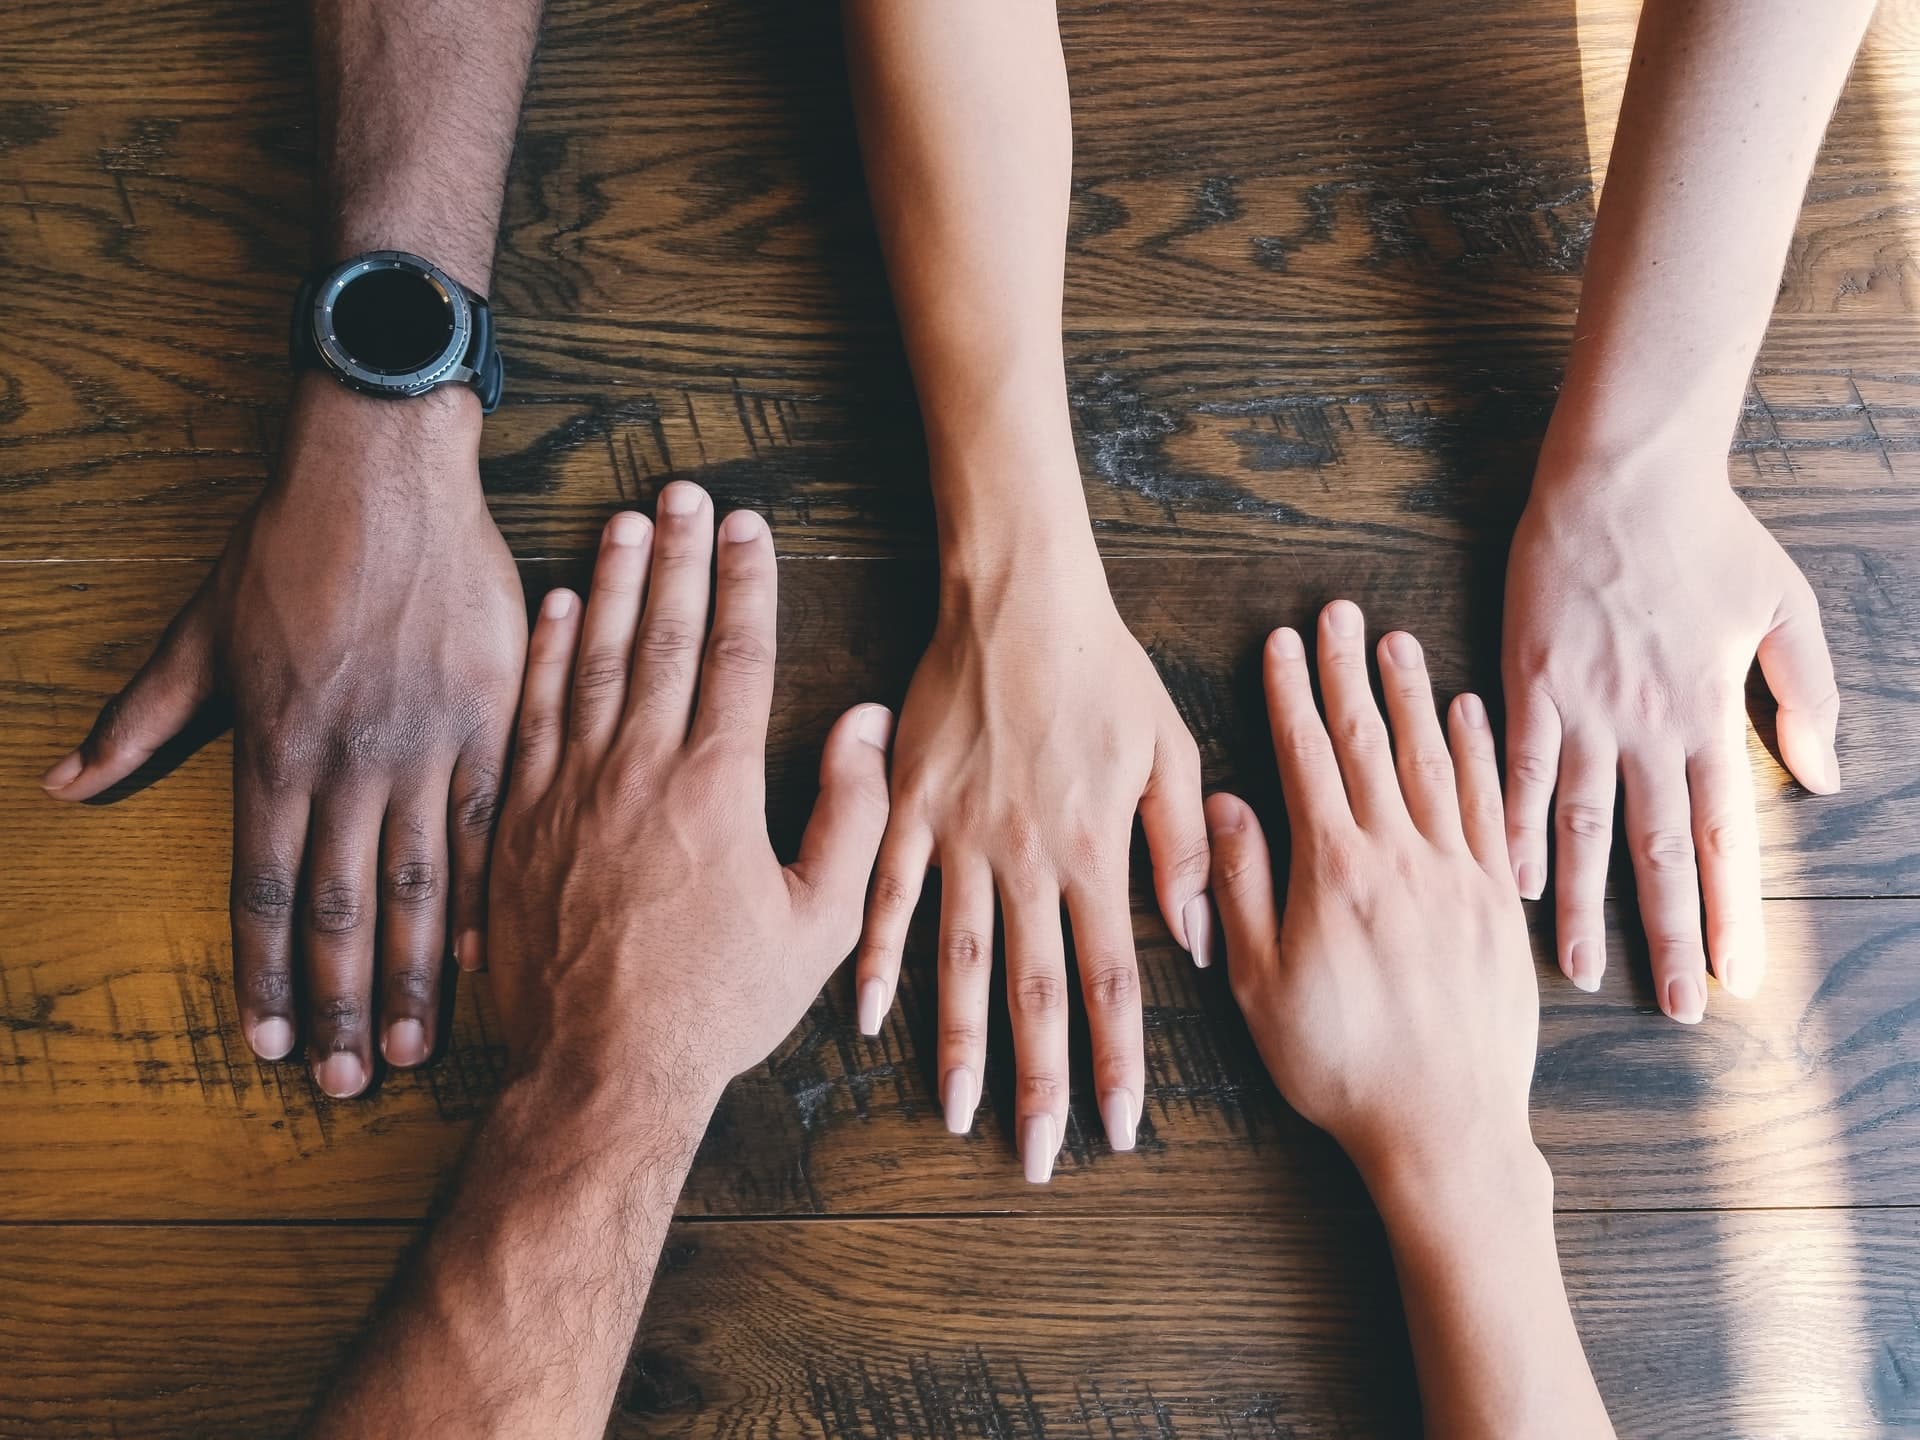 Image shows hands of different ethnicities resting on a table, illustrating the concept of diverse hires.